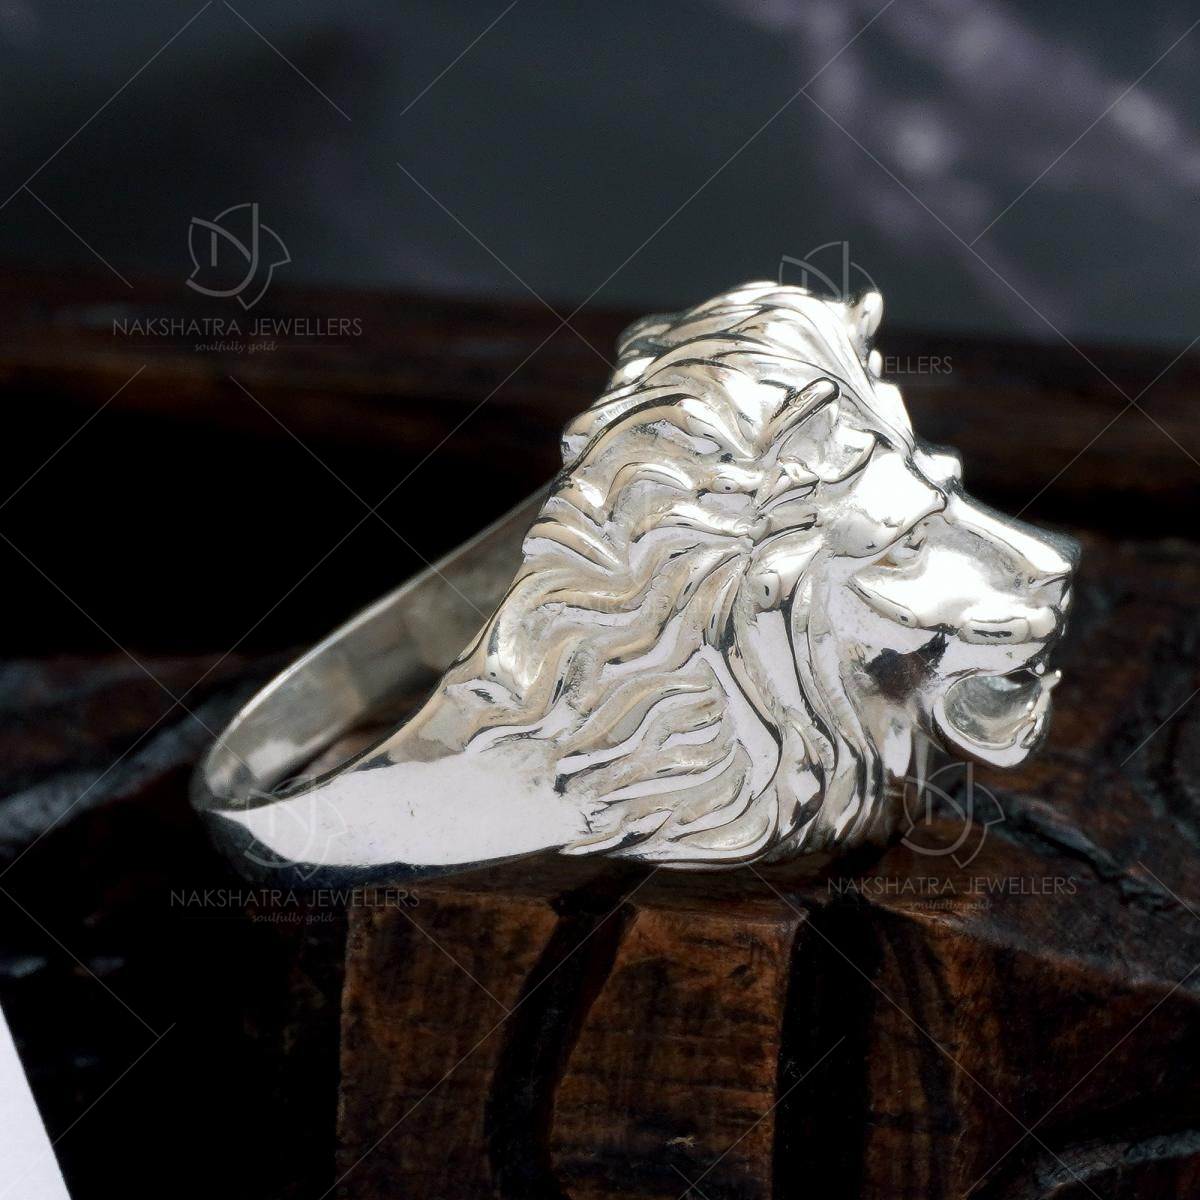 Ridan Lion Gold Mens Ring-Candere by Kalyan Jewellers